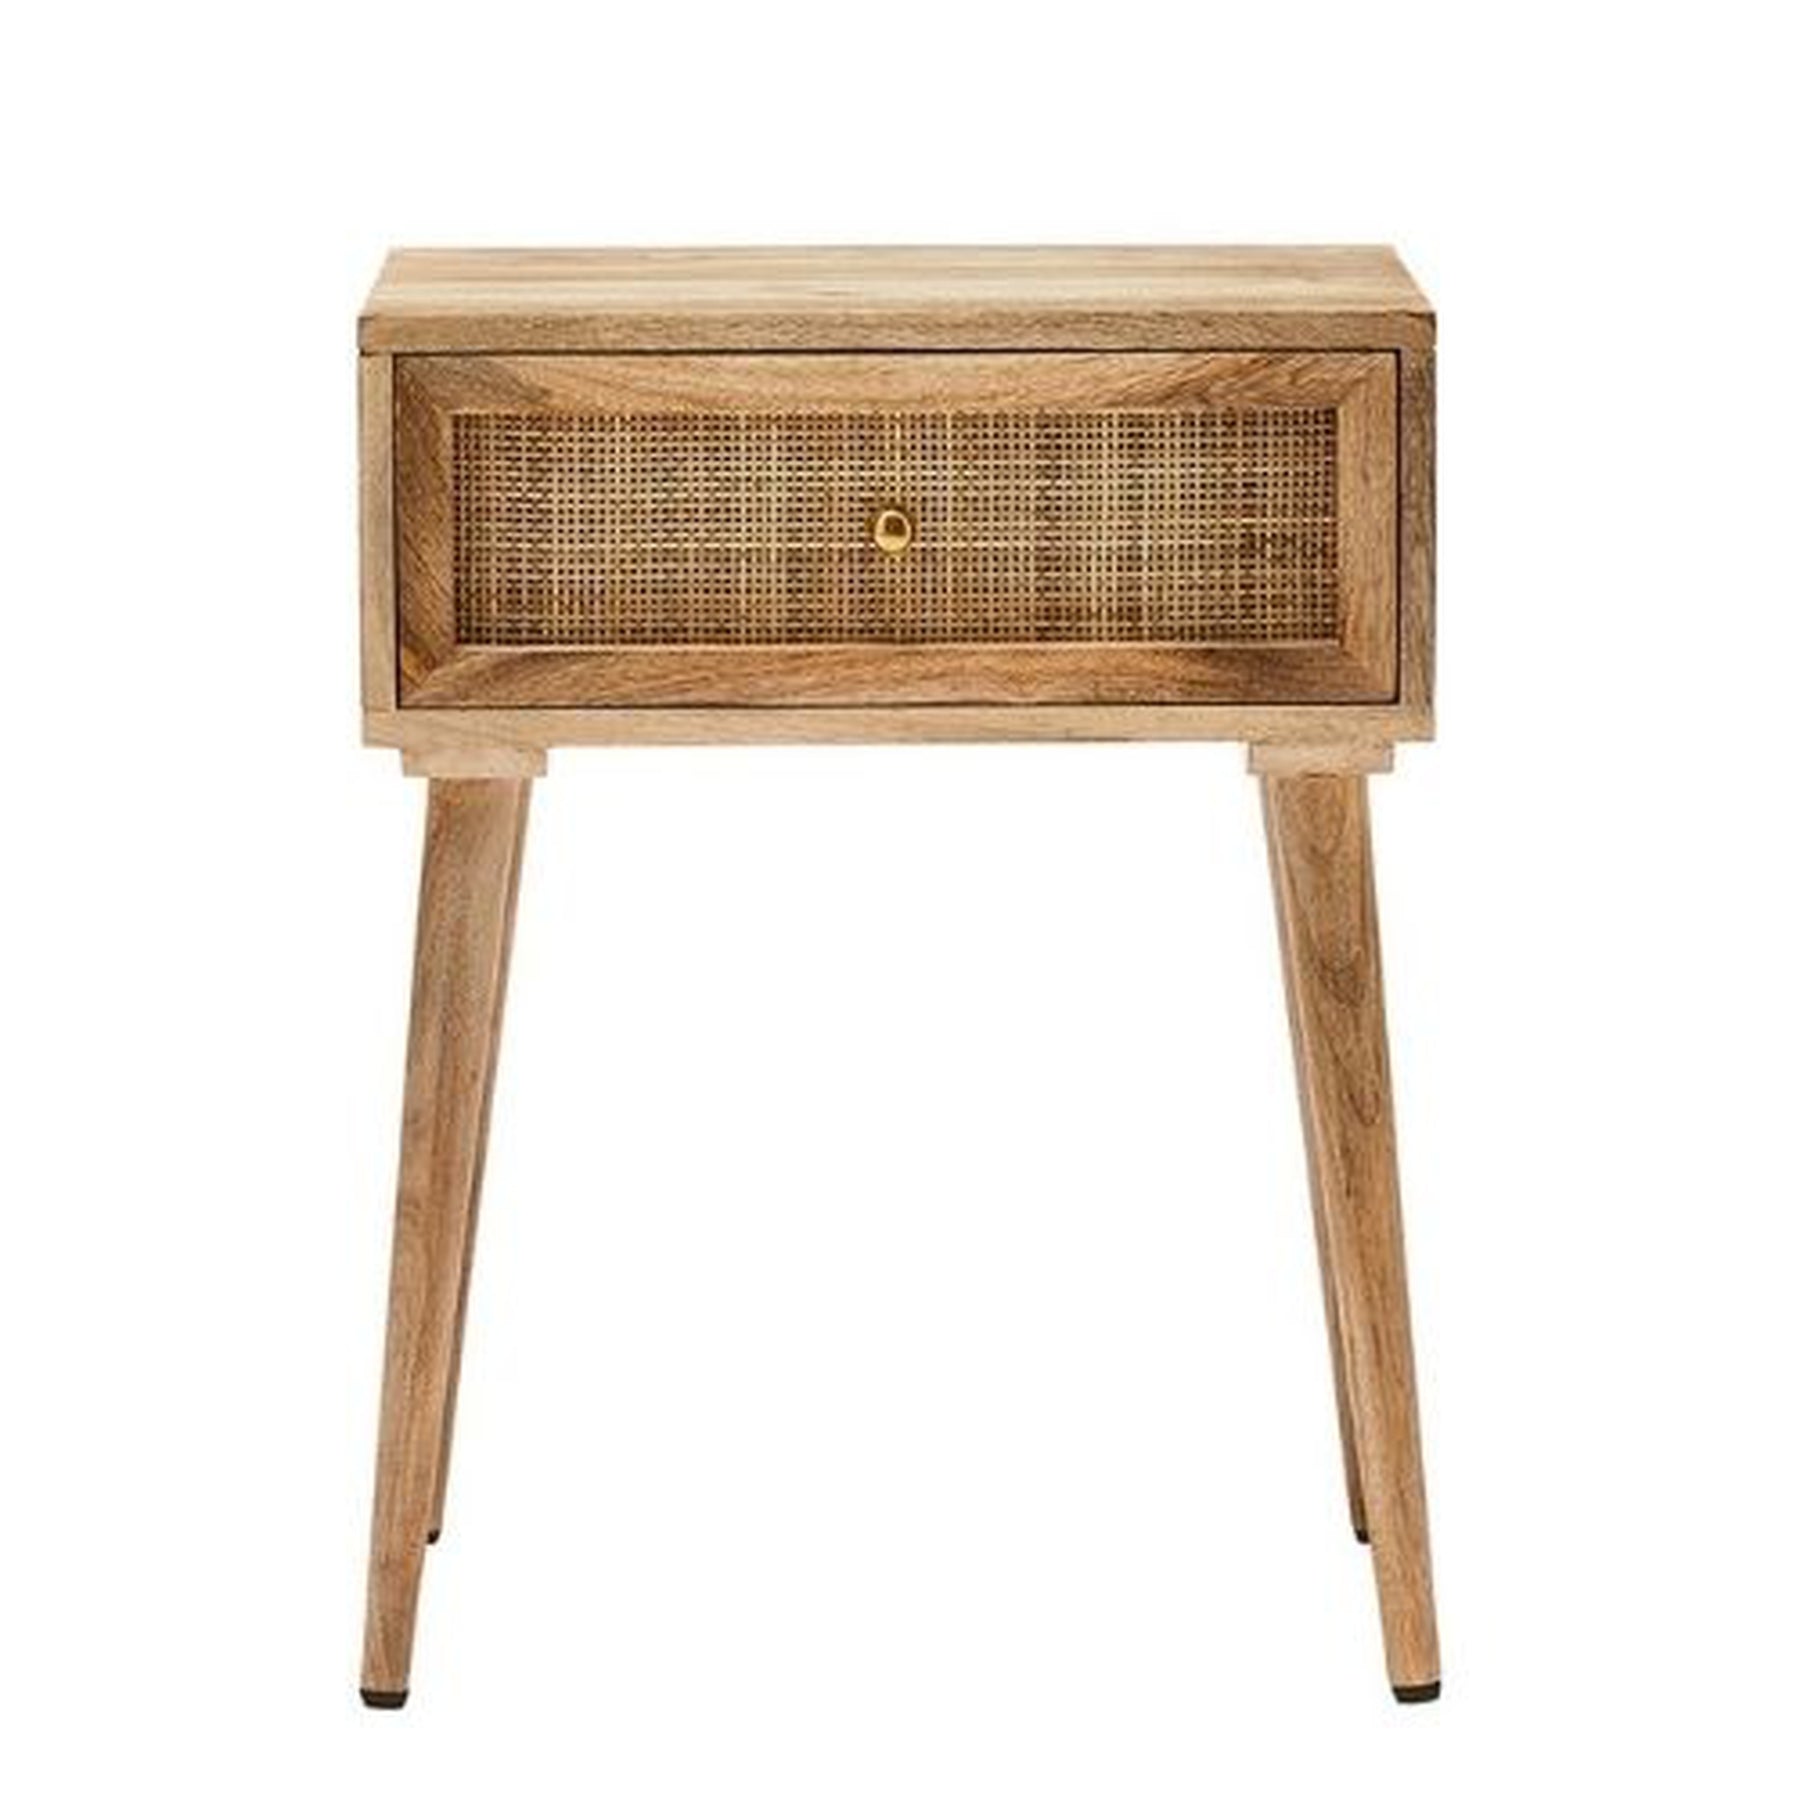 Wooden Straw Range 1 Drawer Side table - Side Wooden Table | 18x14x23 inches